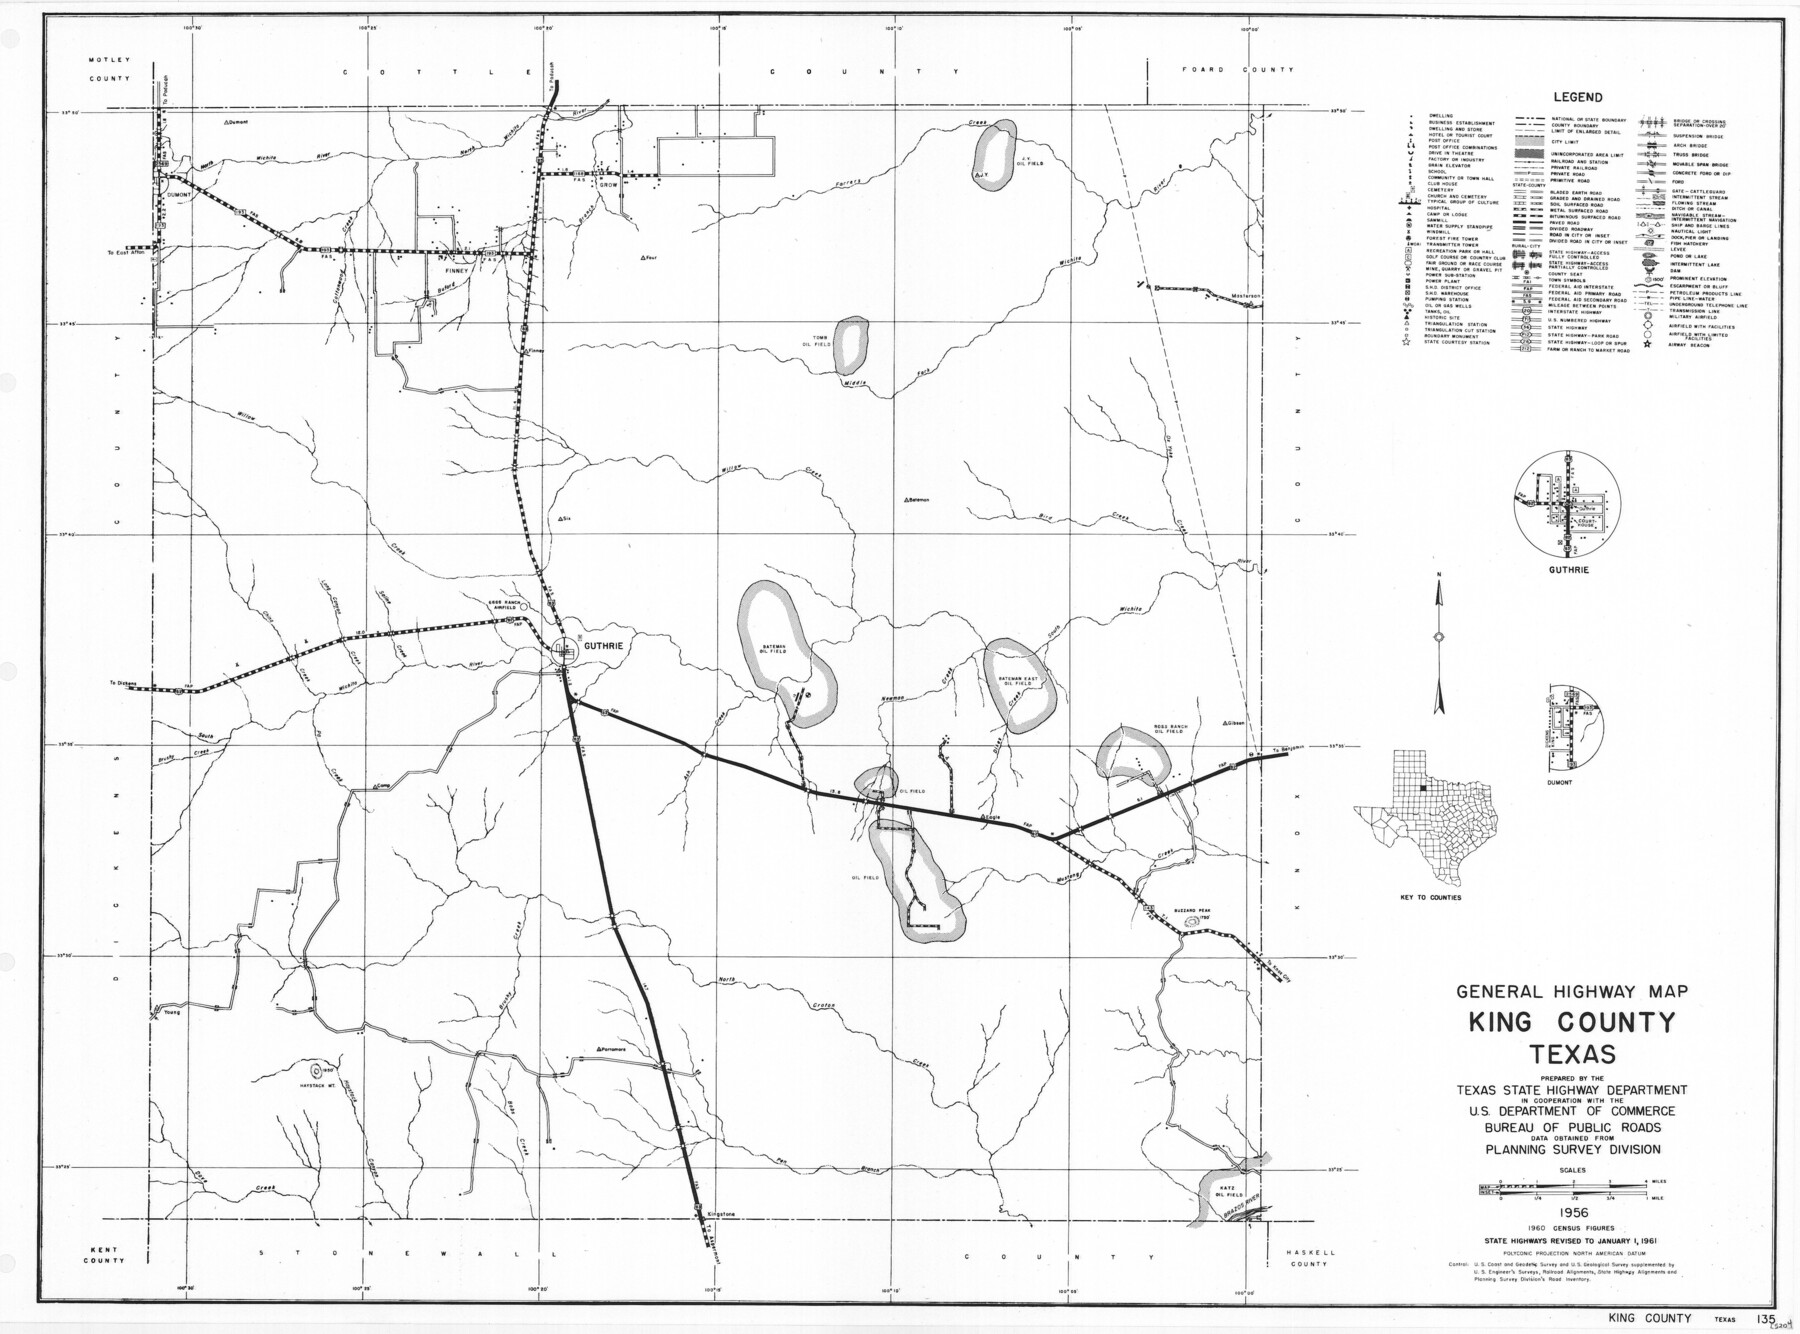 79555, General Highway Map, King County, Texas, Texas State Library and Archives